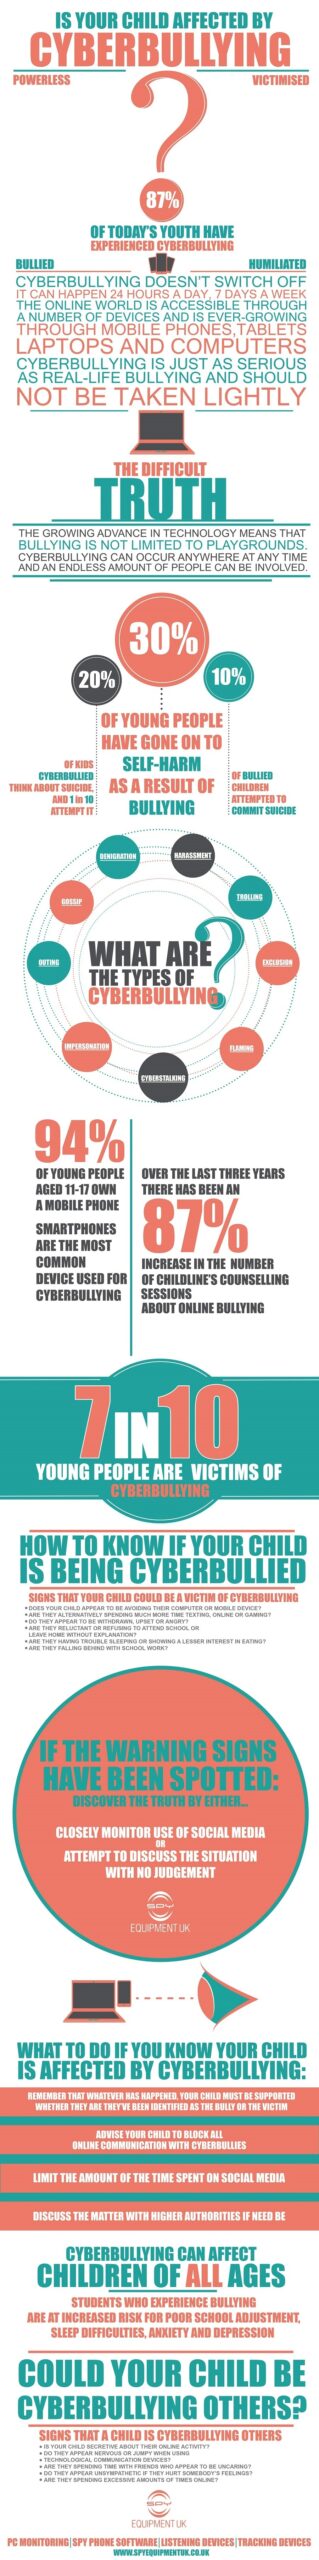 16 Cyber Bullying Facts - Types, Causes, Effects, Prevention